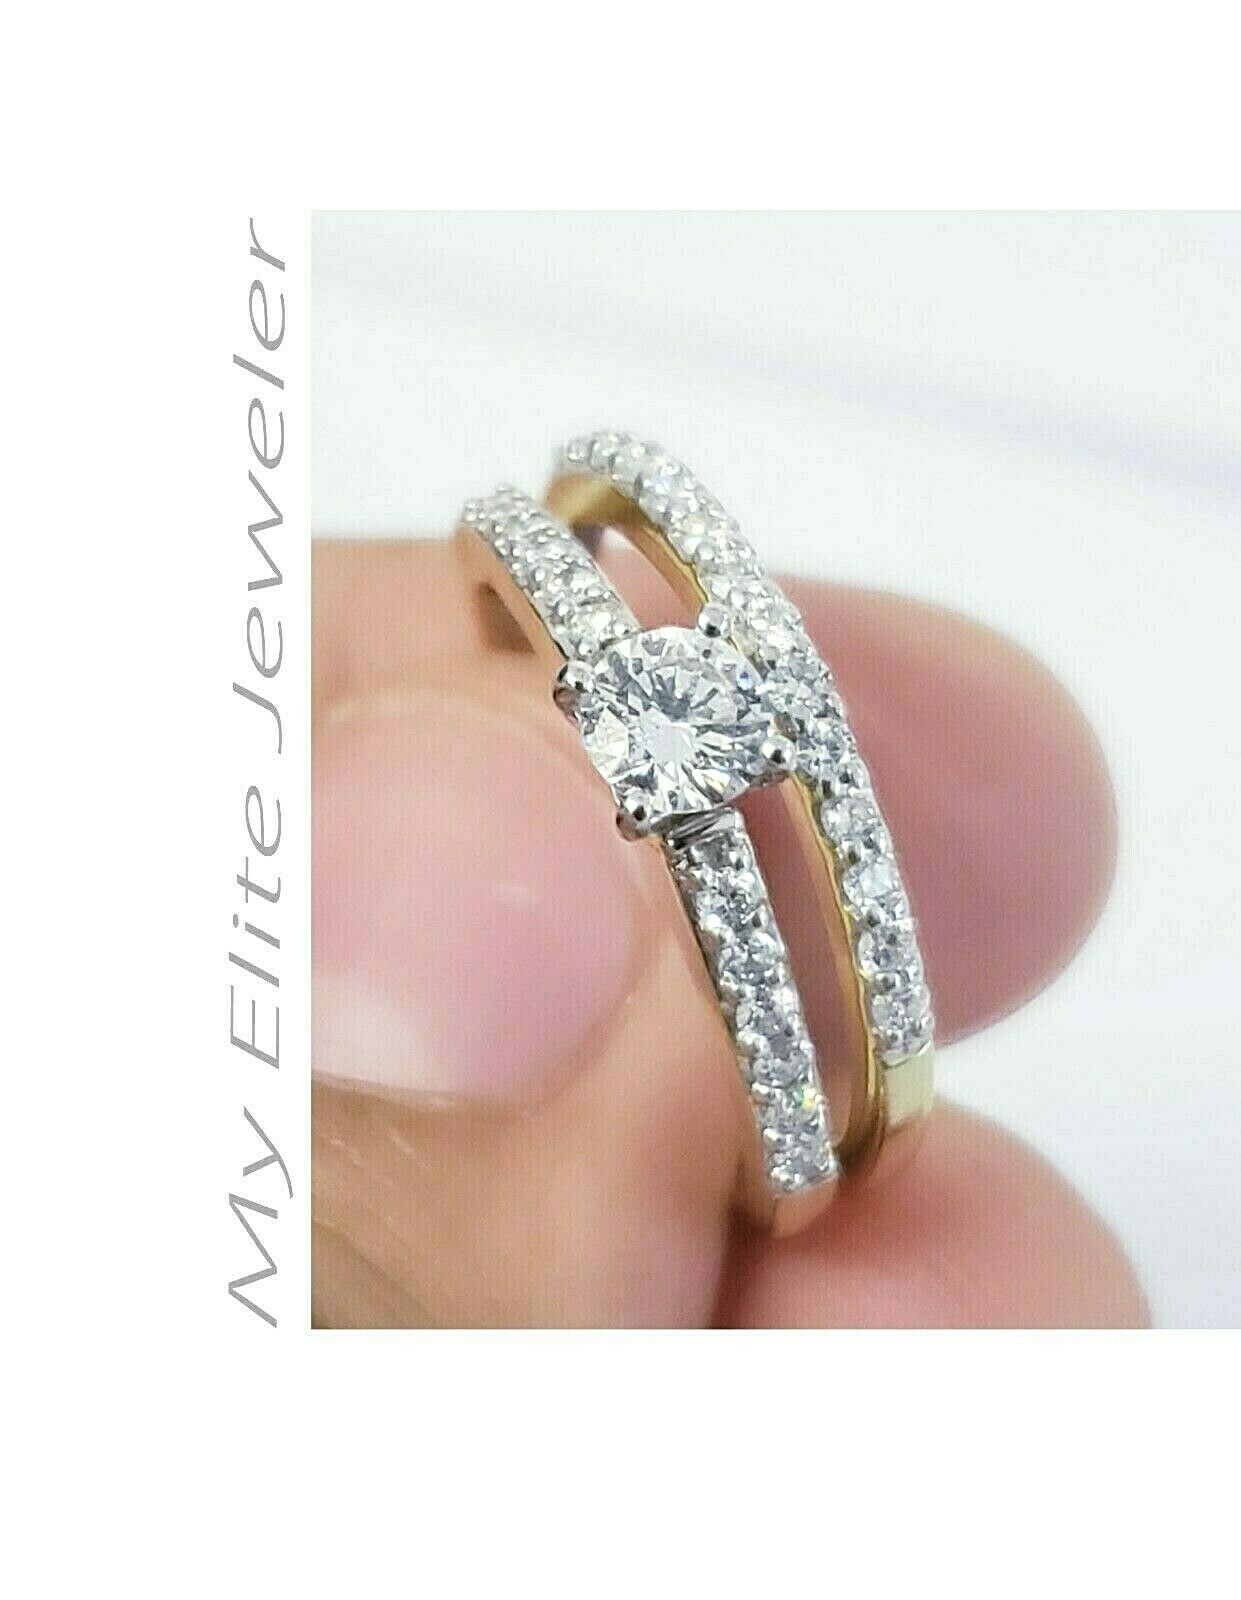 1CT Solitaire Diamond Solid 14k Gold Women Ring  Band Bridal Set Size 7, SIZABLE